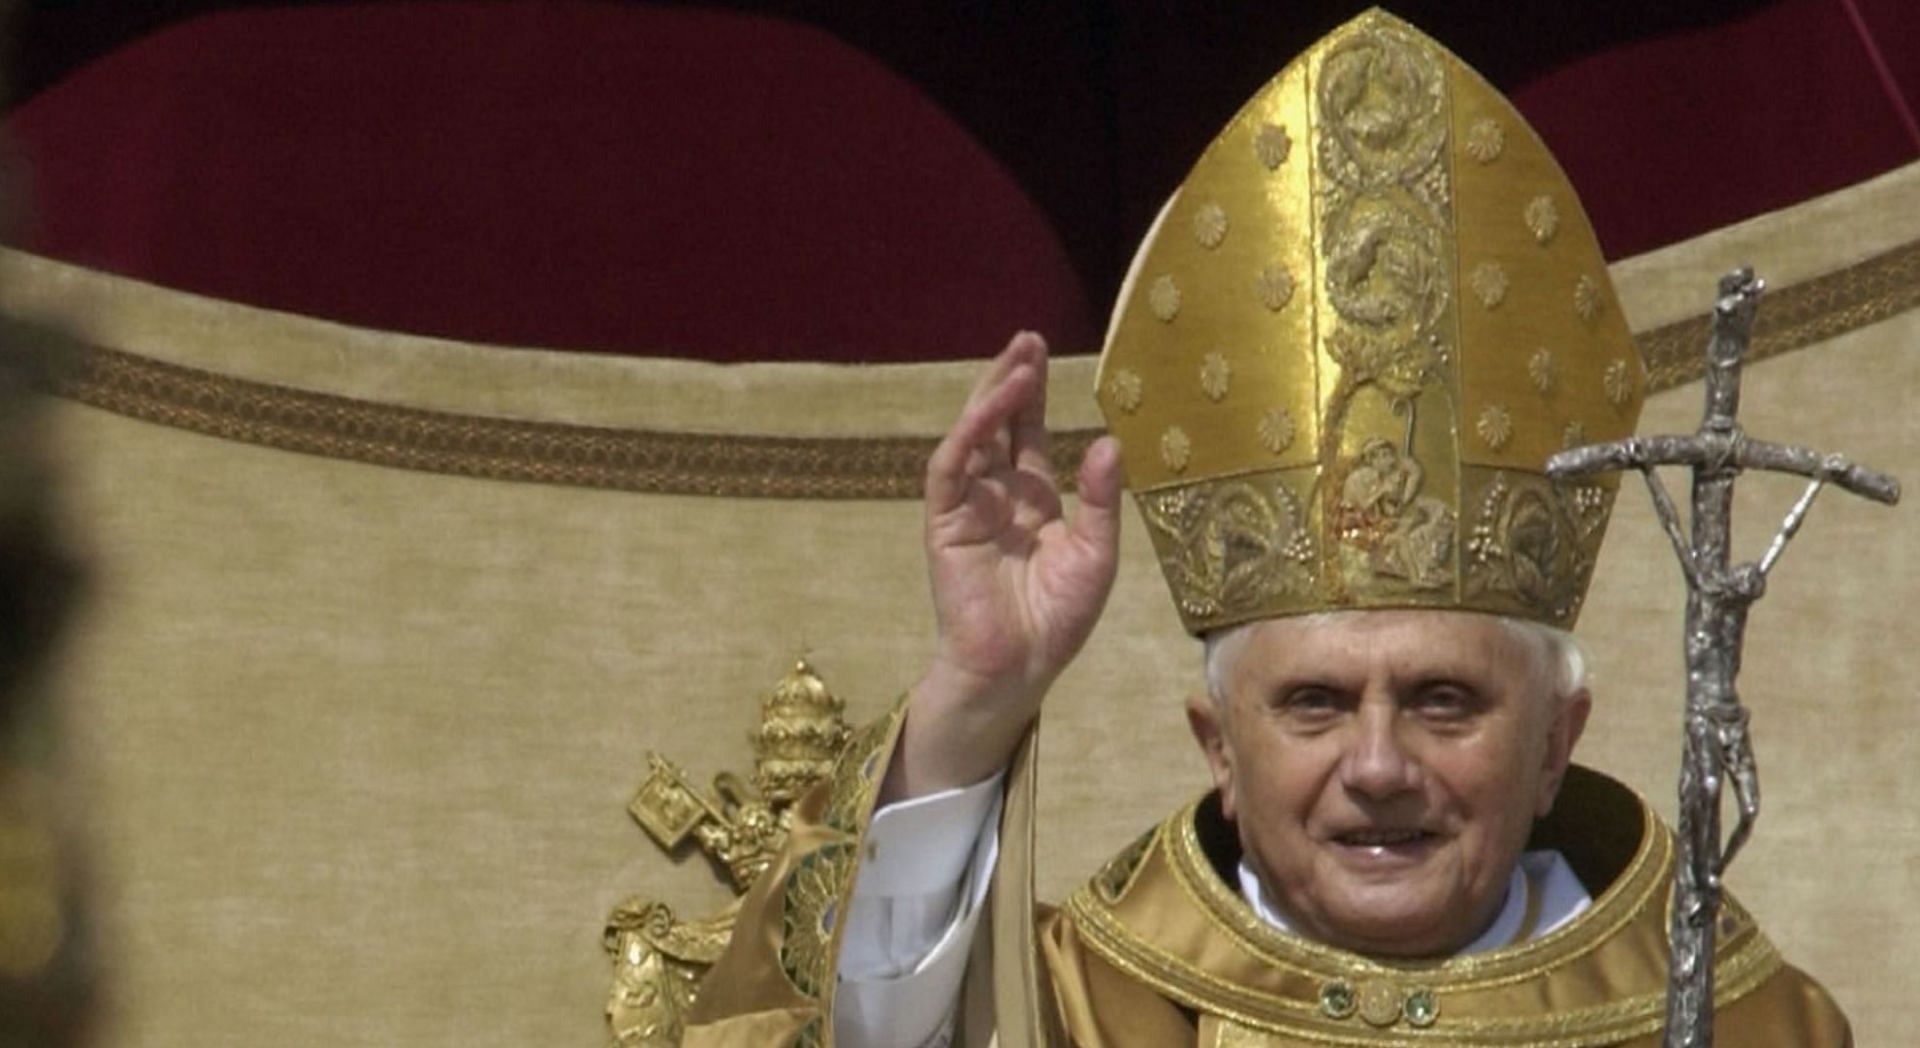 Pope Benedict XVI passed away at the age of 95 (Image via Getty Images)